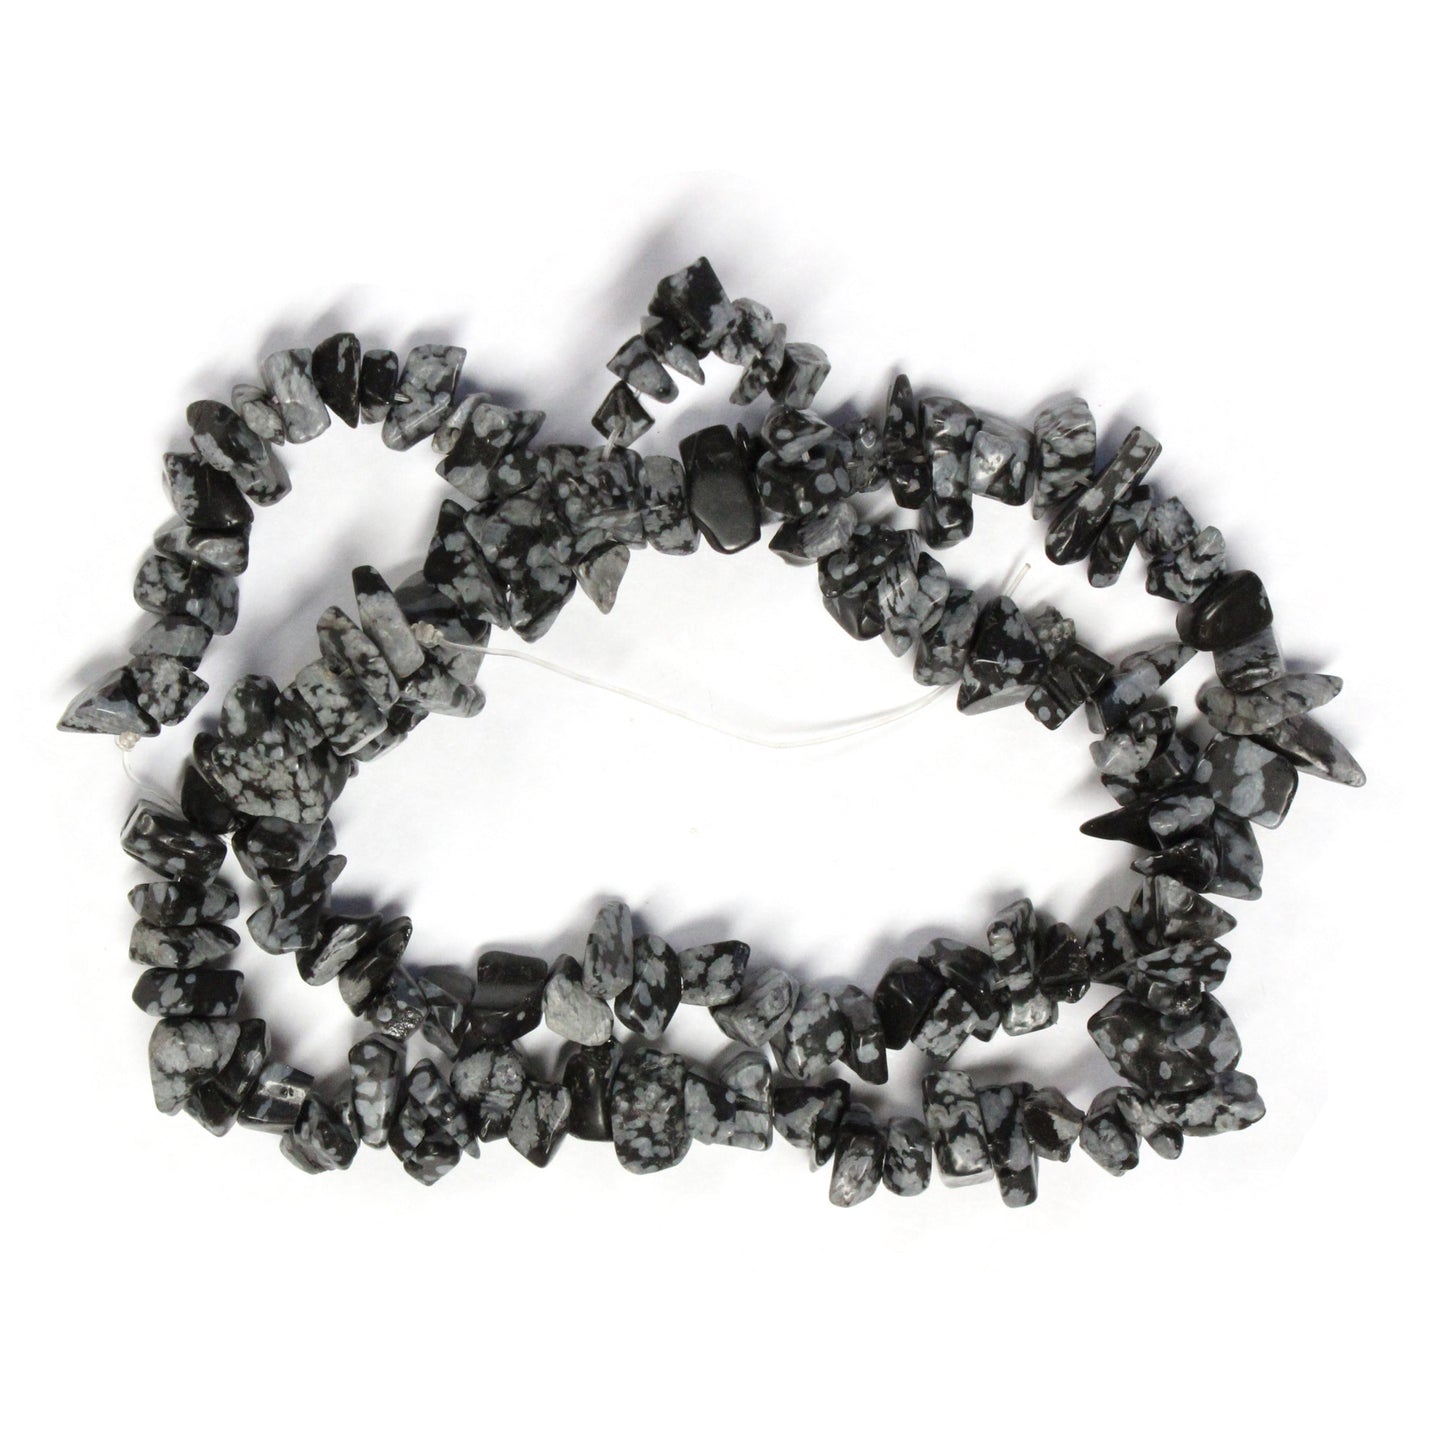 Snowflake Obsidian Chip Beads / 16 Inch strand / 5-10mm chips / natural opaque stone